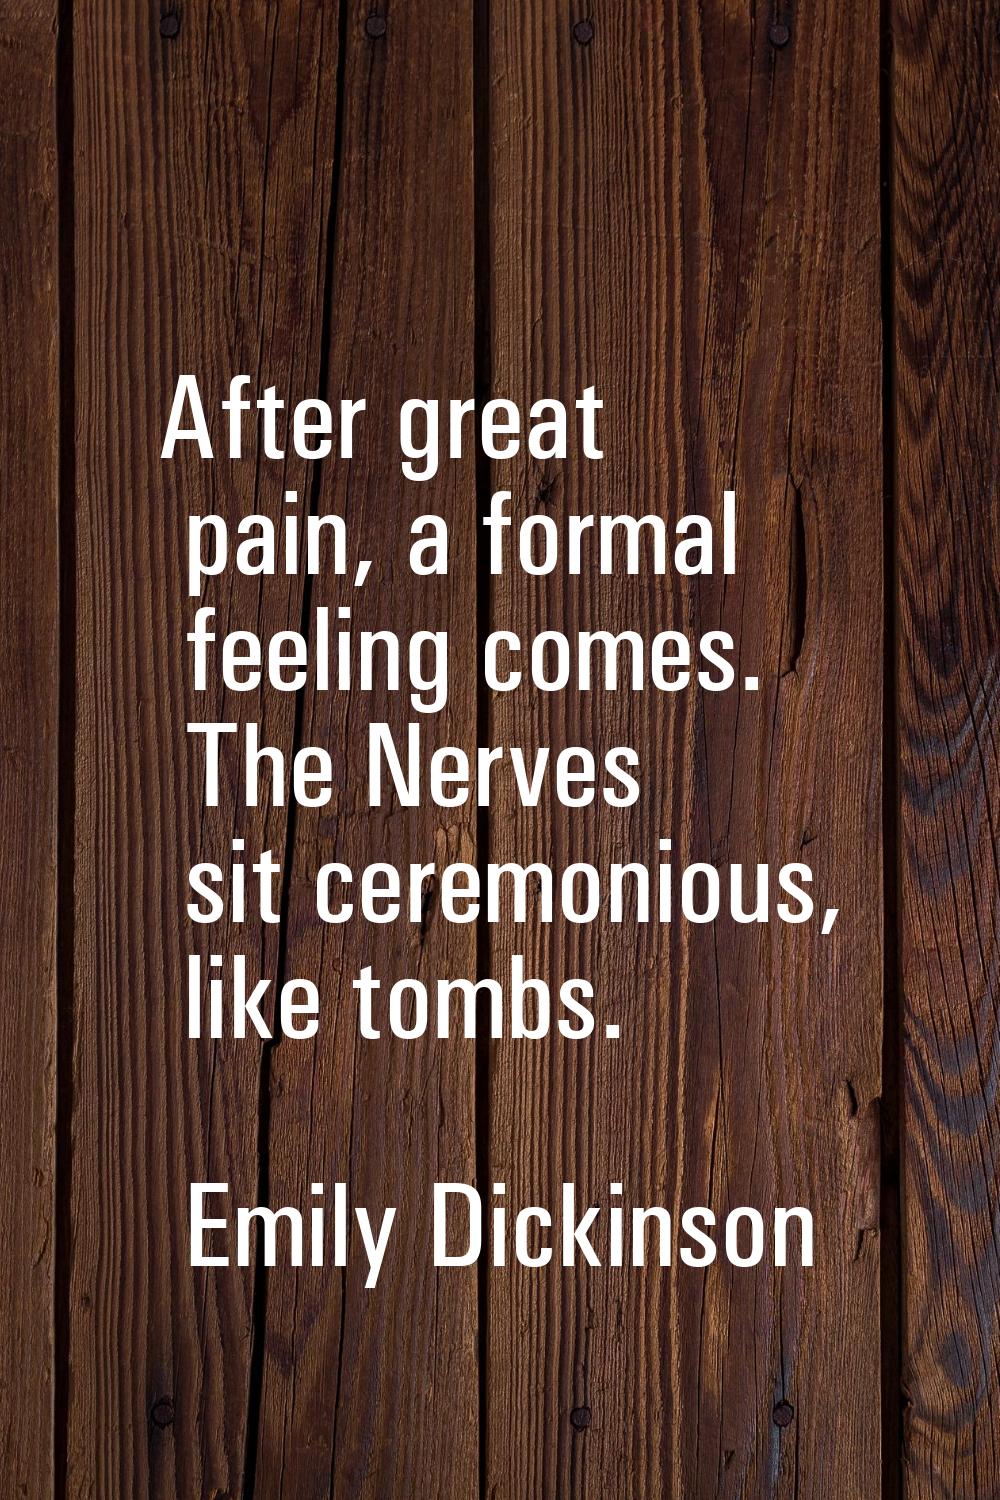 After great pain, a formal feeling comes. The Nerves sit ceremonious, like tombs.